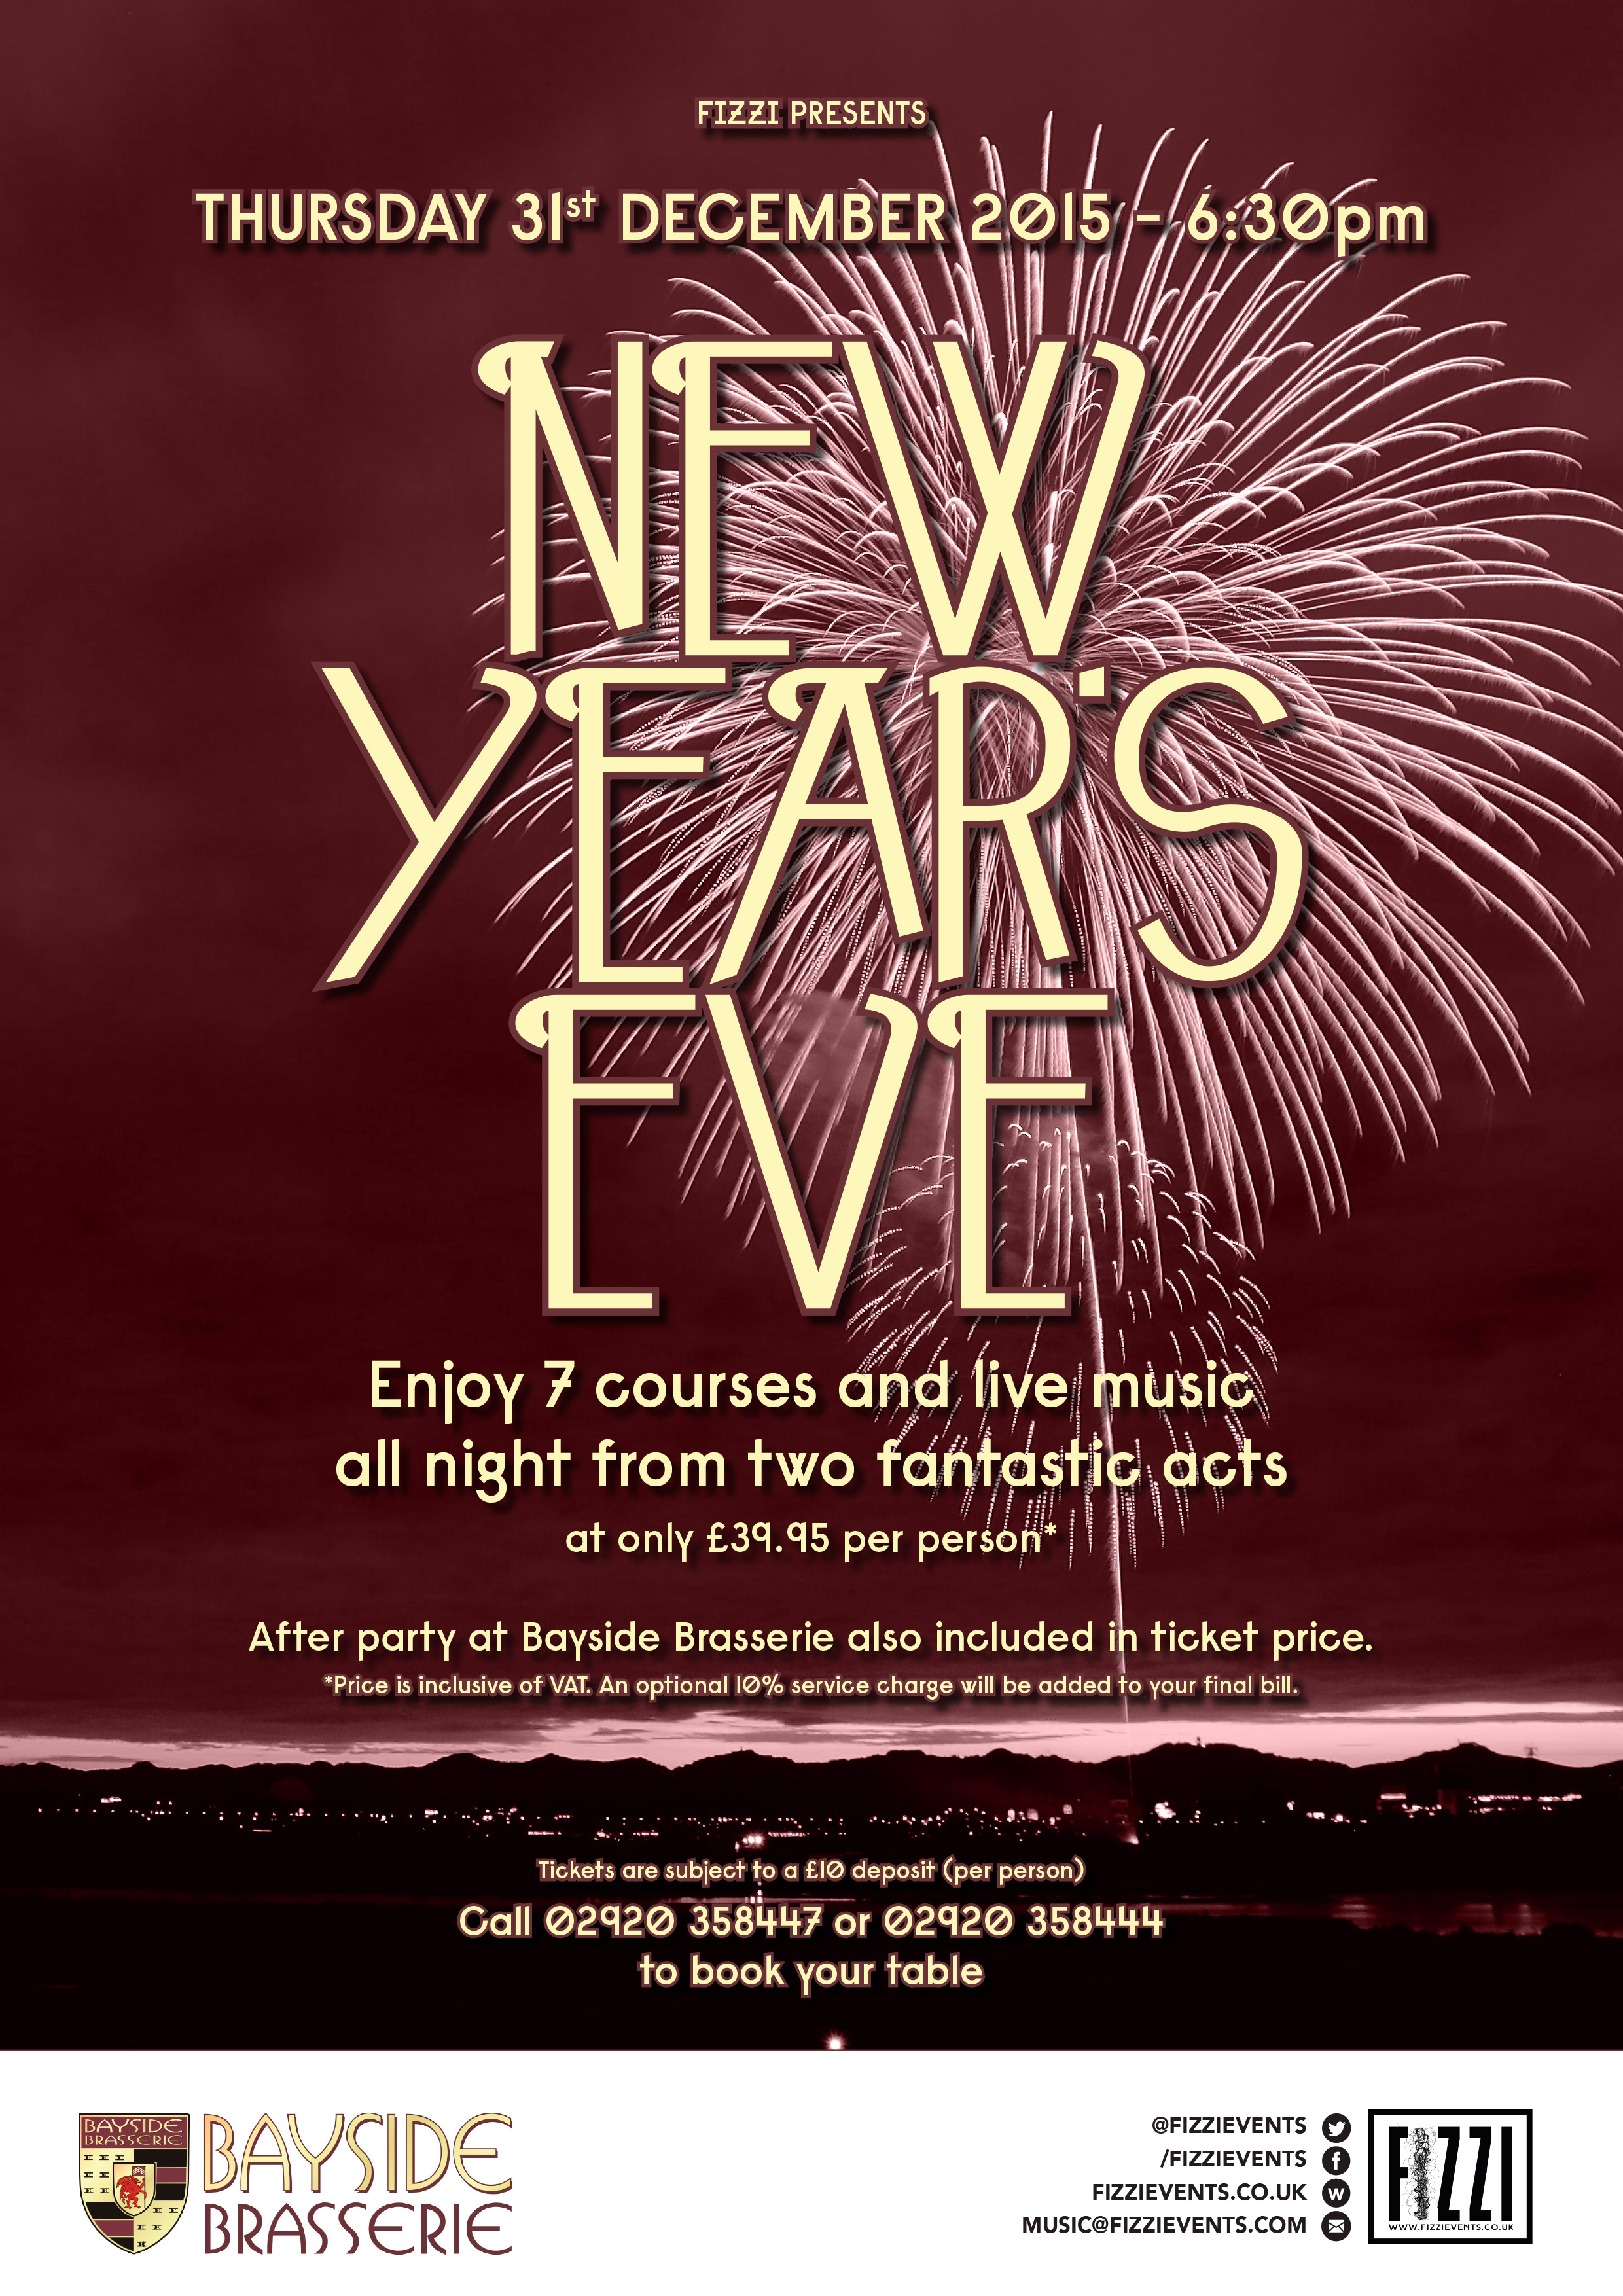 New Year’s Eve at Bayside Brasserie